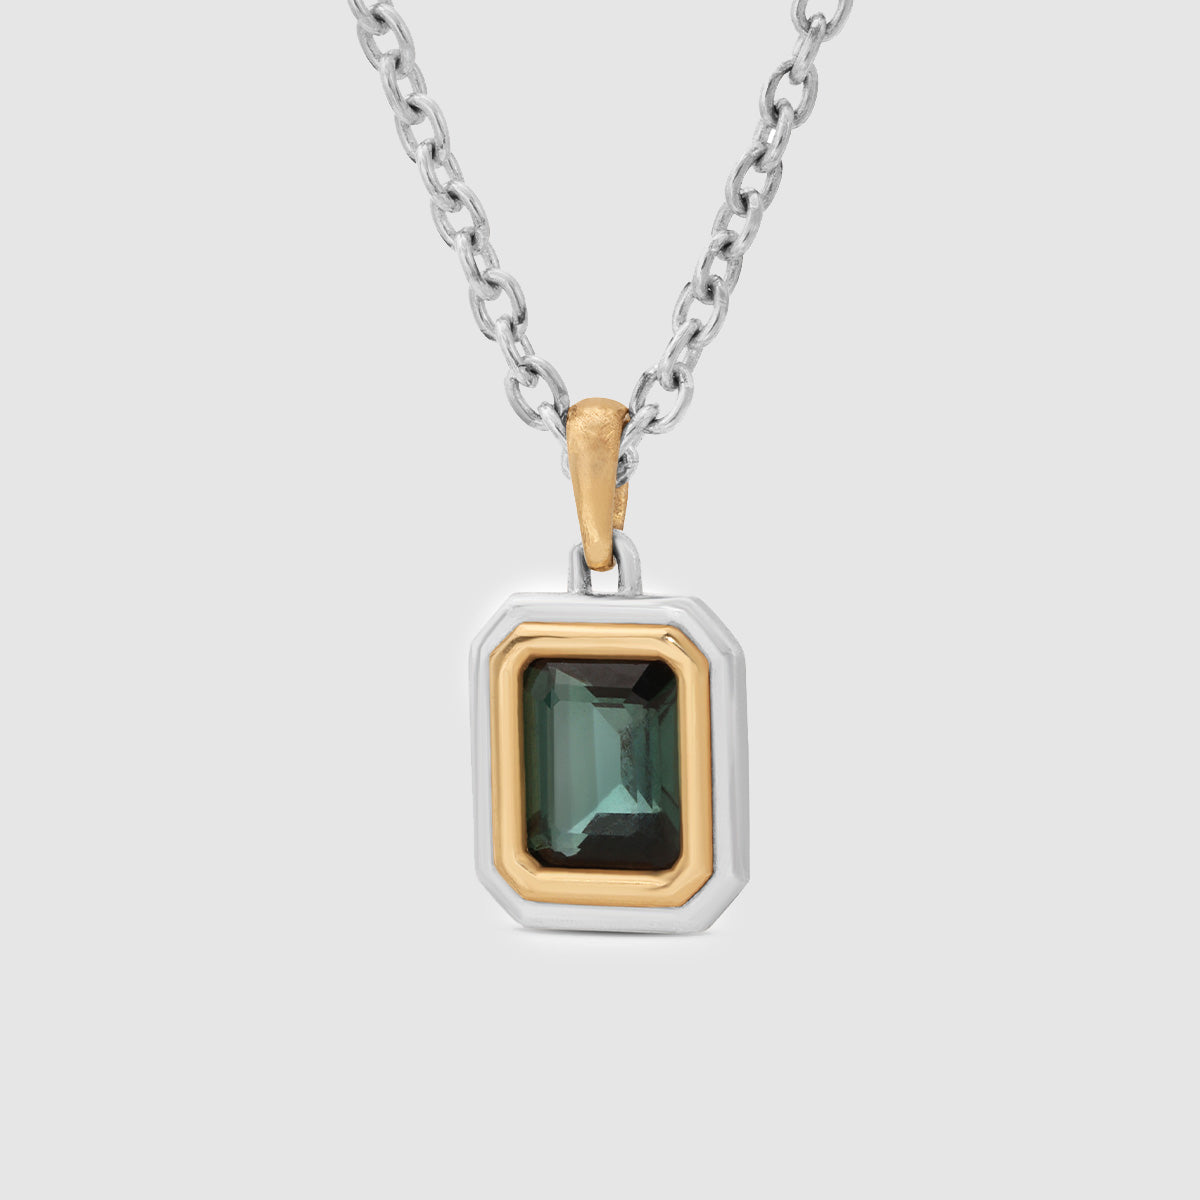 Equinox Charm Necklace in Silver and Yellow Gold Trim with Blue Topaz